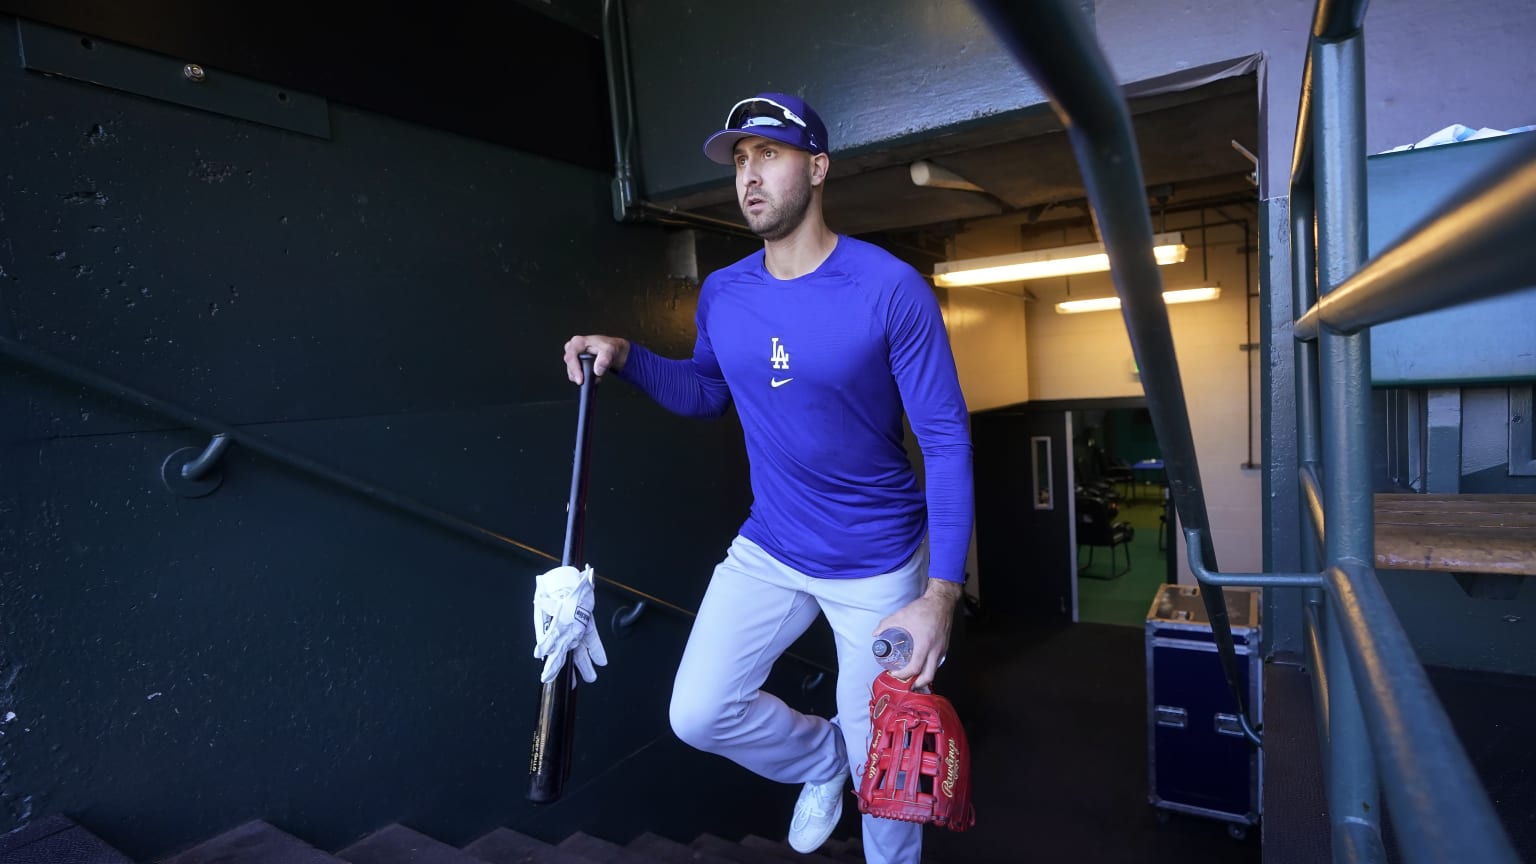 Joey Gallo wears a Dodgers shirt and carries a bat and glove as he emerges from the clubhouse